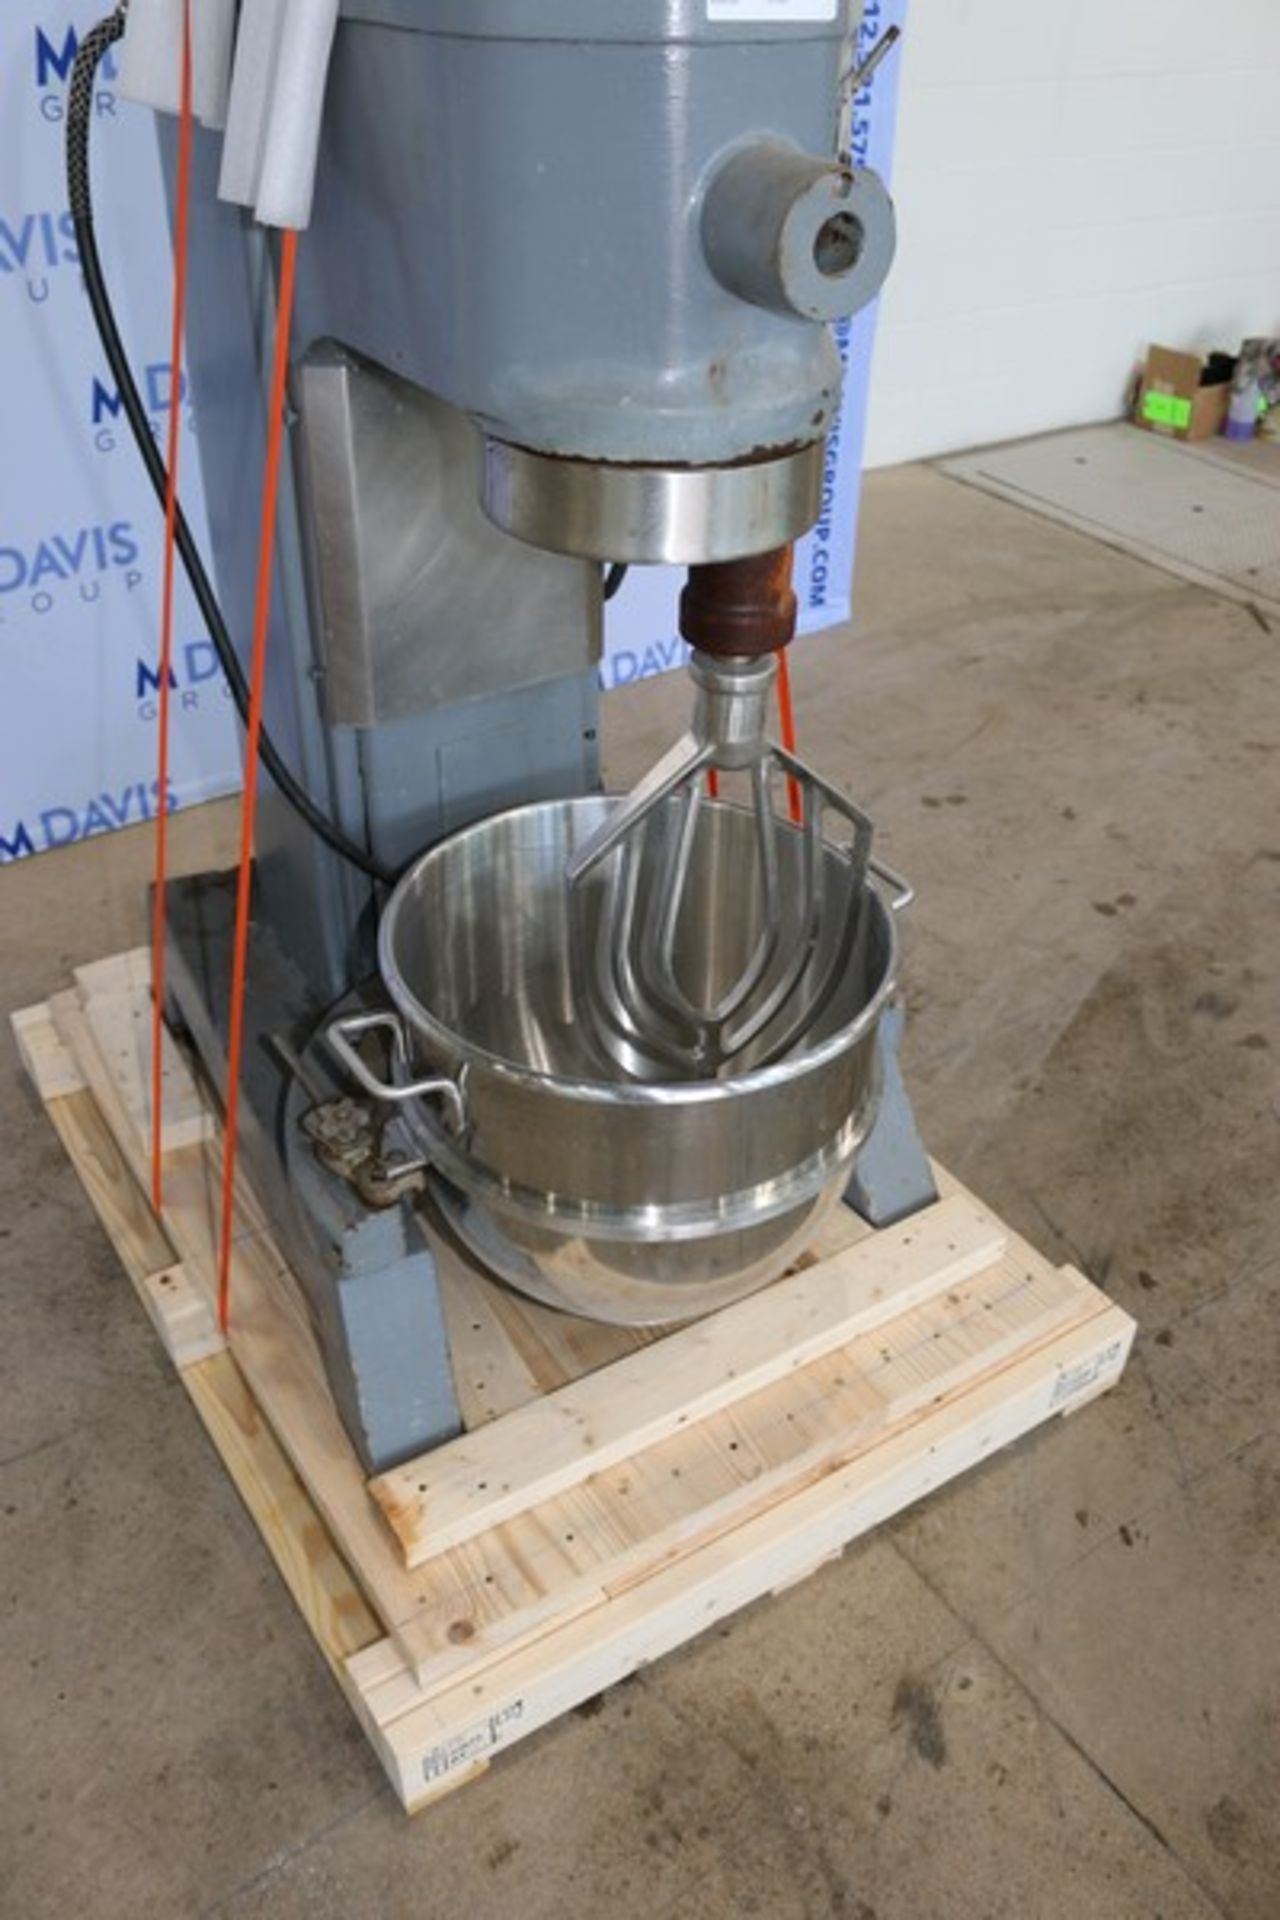 Hobart Mixer,-M/N L-800, S/N 11-213-617, 200 Volts, 1725 RPM Motor, with 1-1/2 hp Motor, with S/S - Bild 3 aus 6